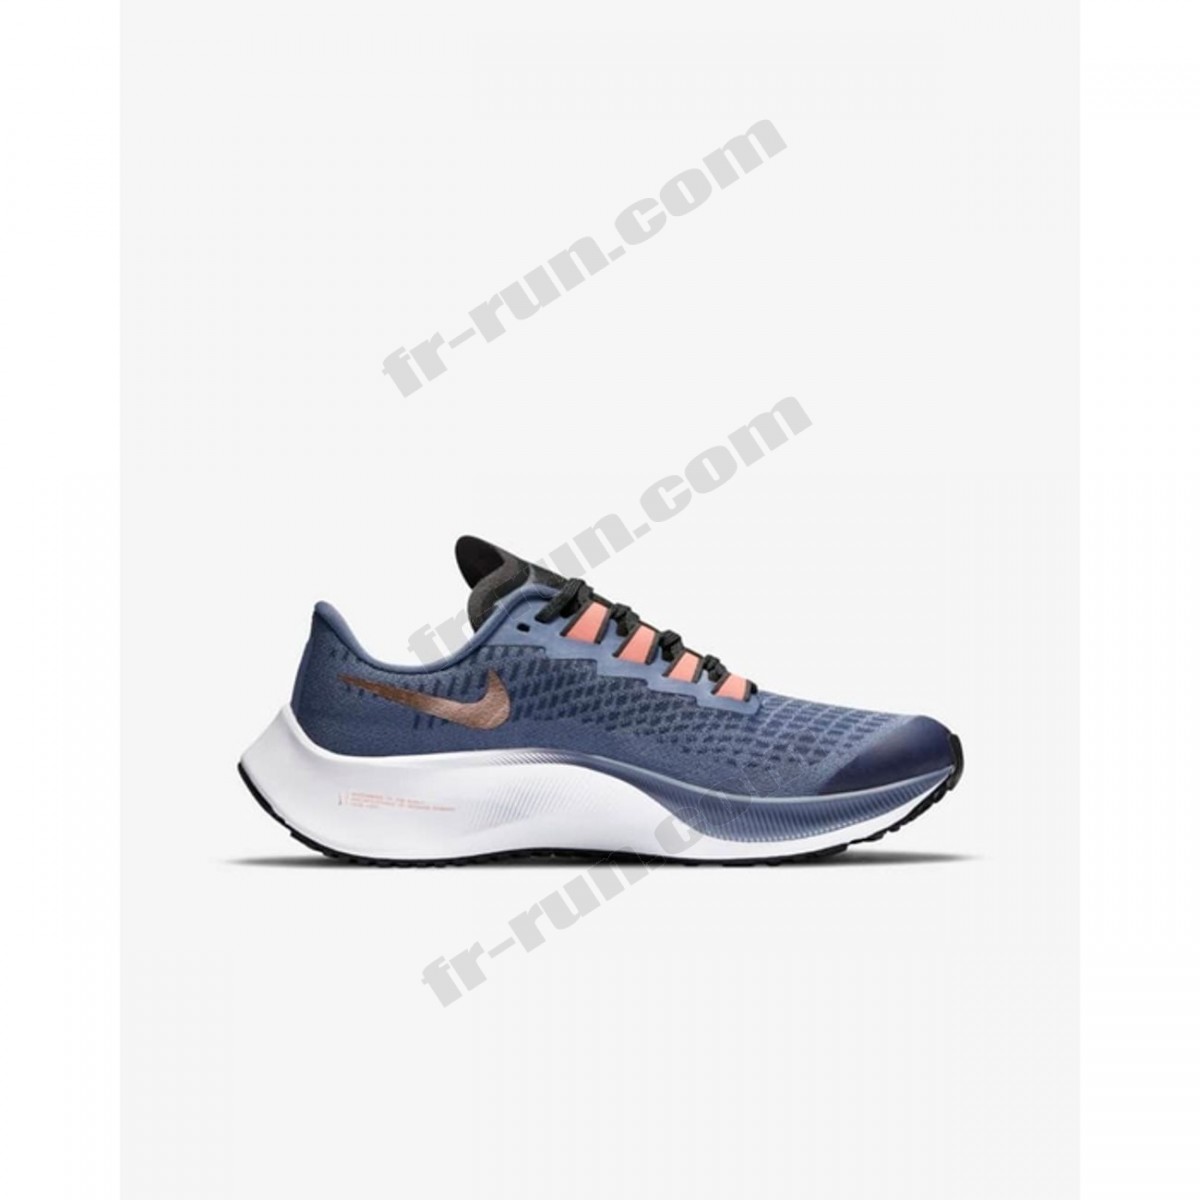 Nike/CHAUSSURES running NIKE AIR ZOOM PEGASUS 37 √ Nouveau style √ Soldes - -0